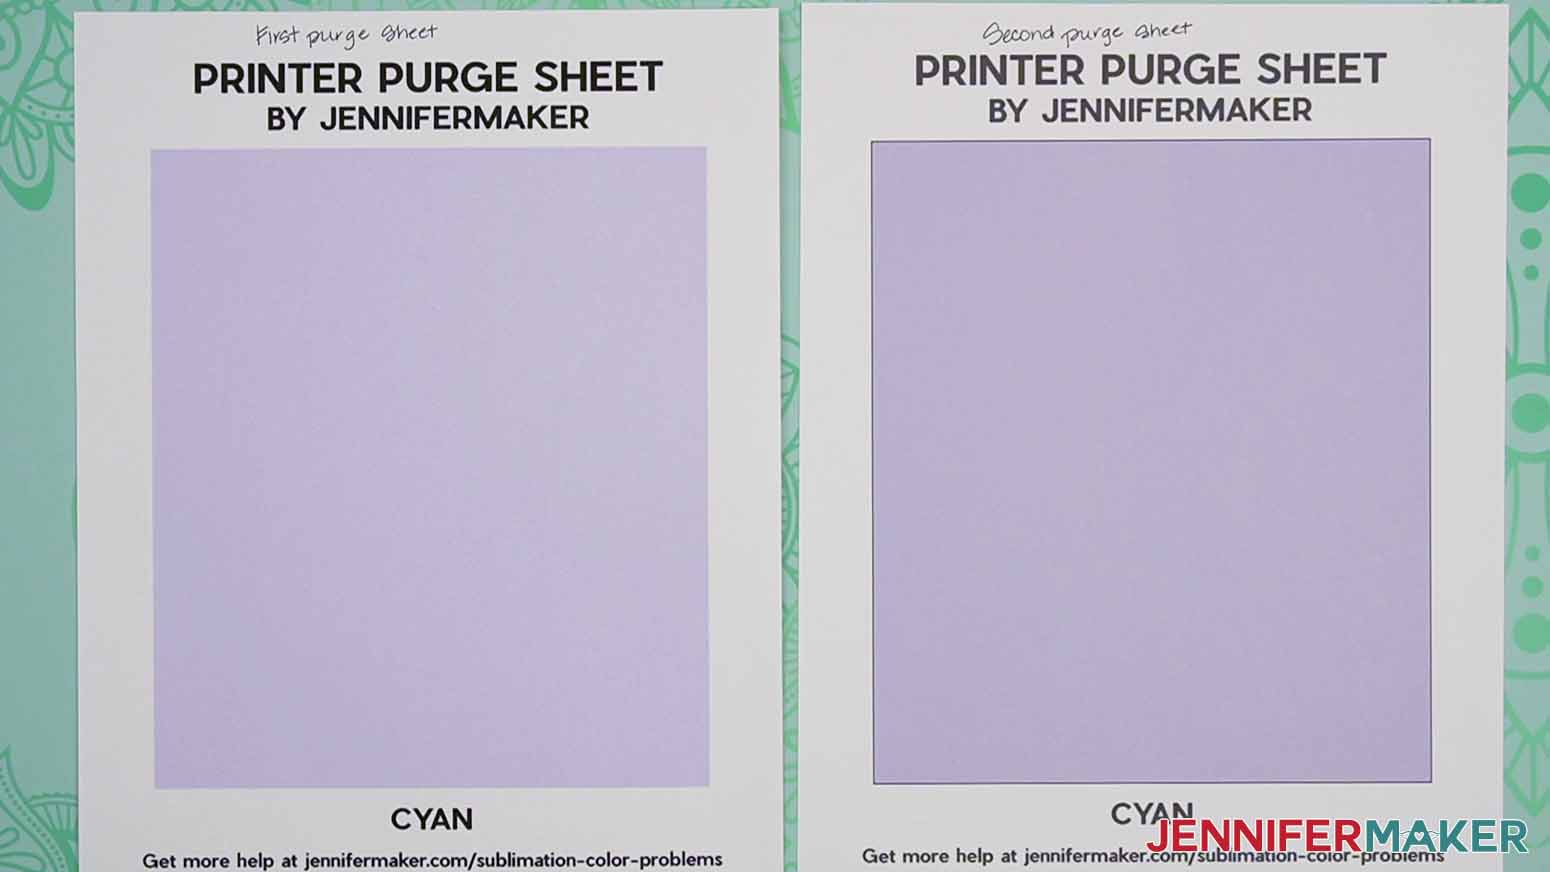 Label the second purge sheet and check it for any changes.